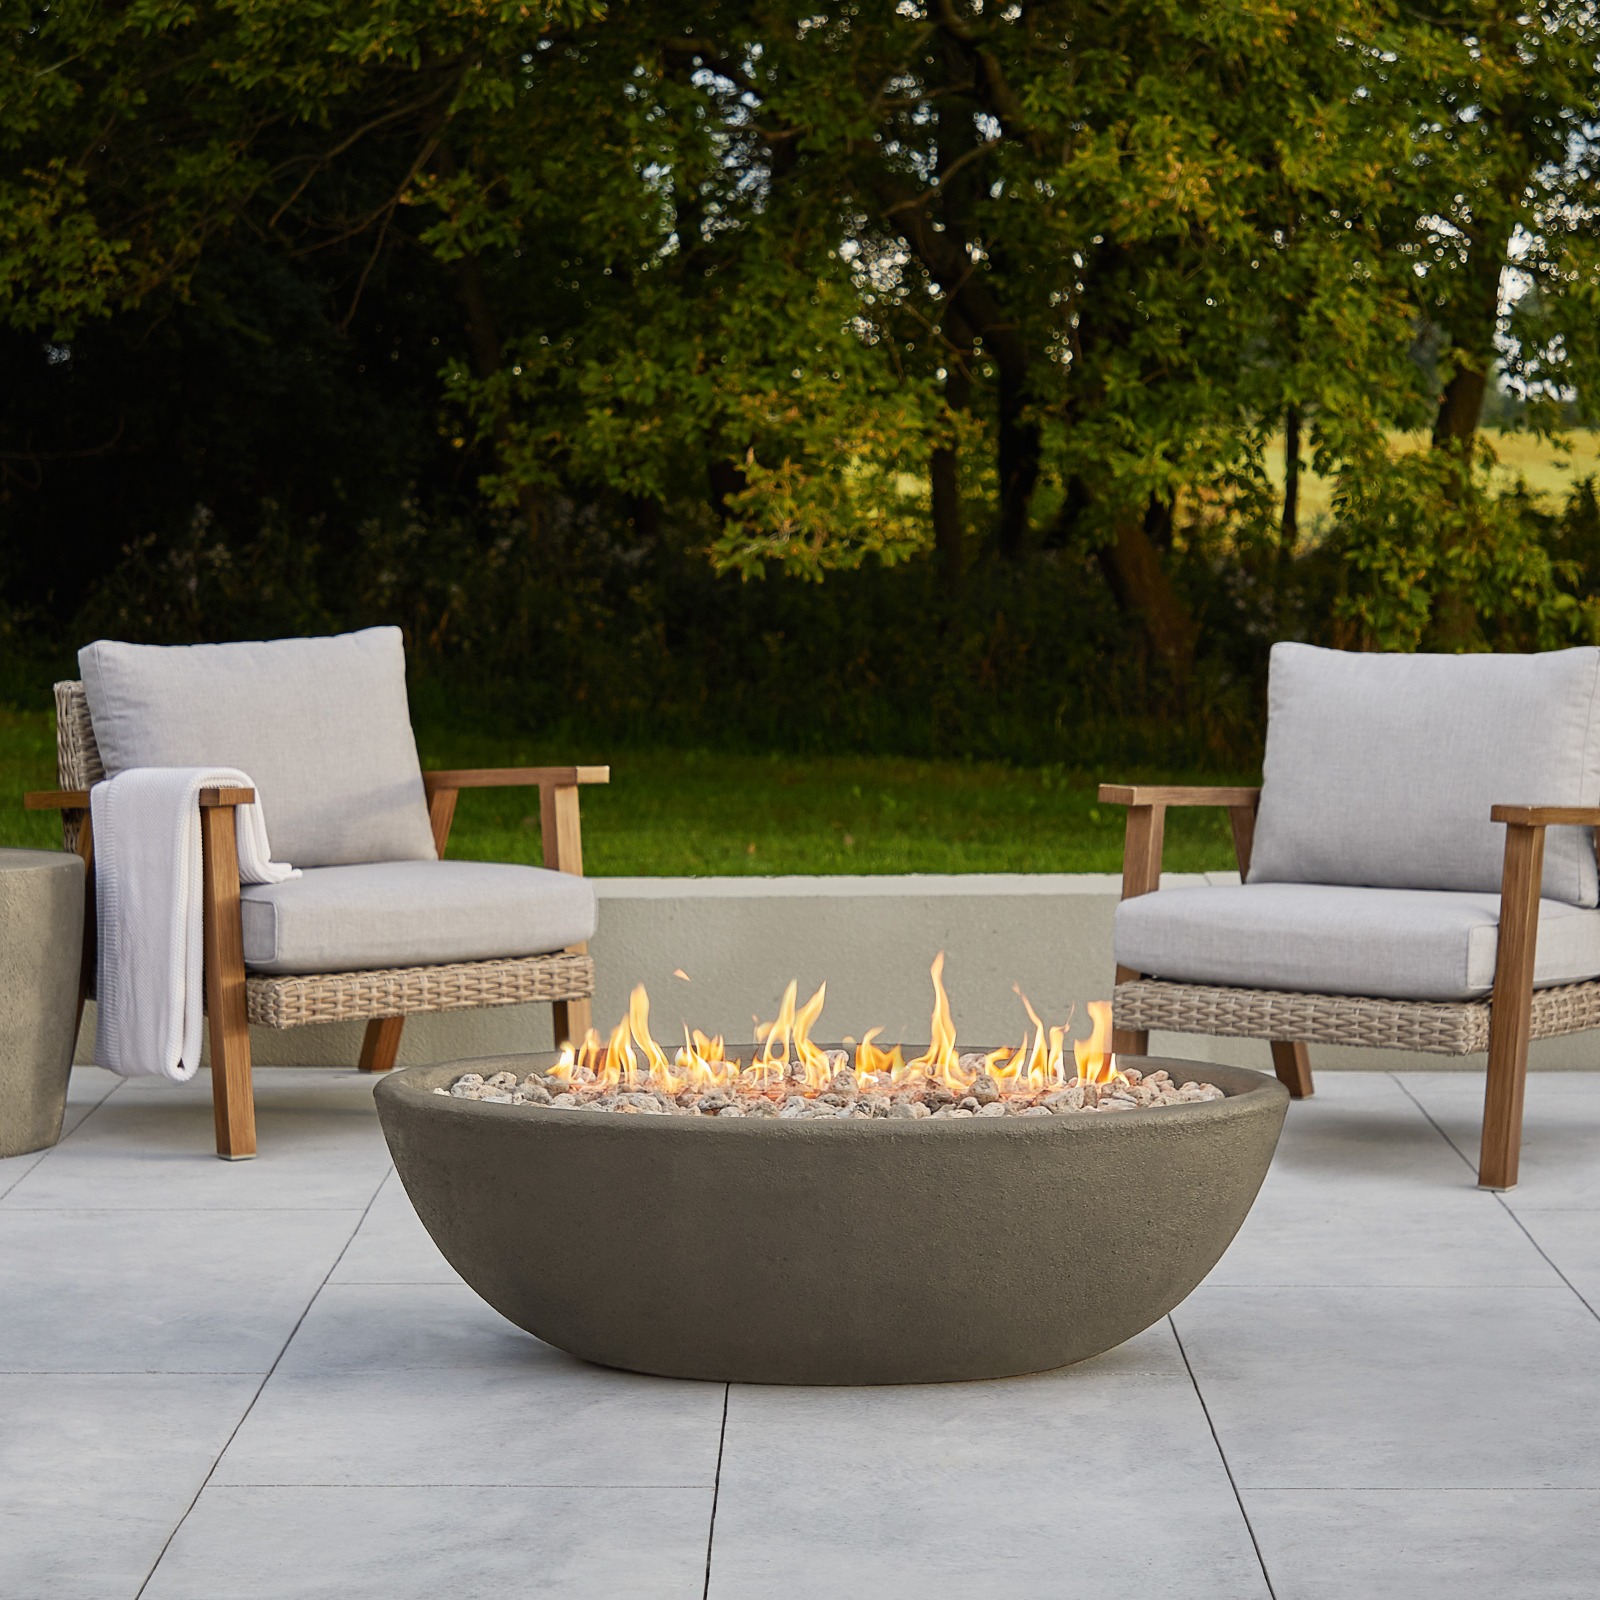 Riverside Oval Propane Fire Pit Fire Bowl Outdoor Fireplace Fire Table for Backyard or Patio